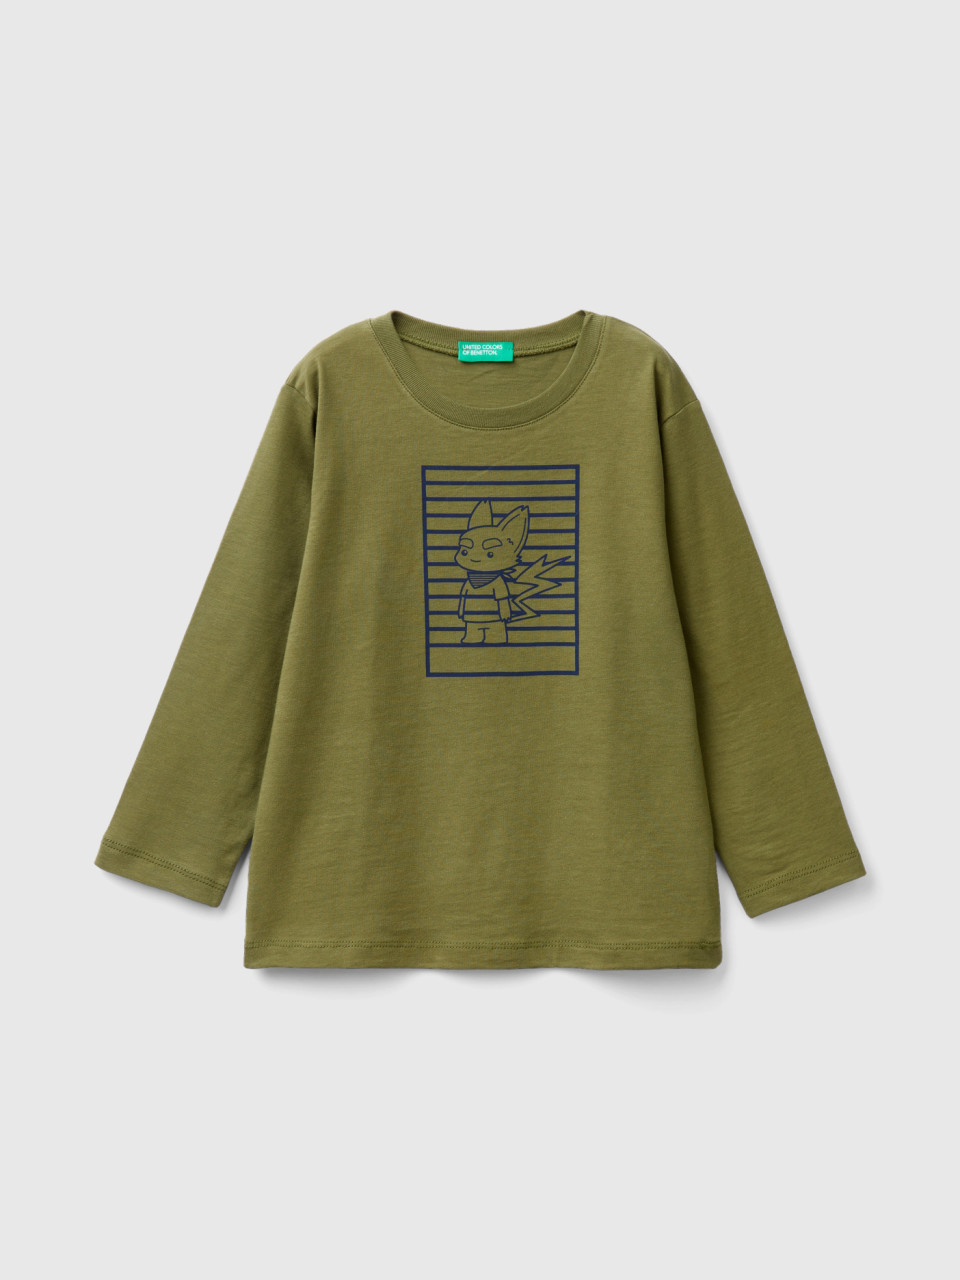 Benetton, Sweater In Cotton With Print, Military Green, Kids